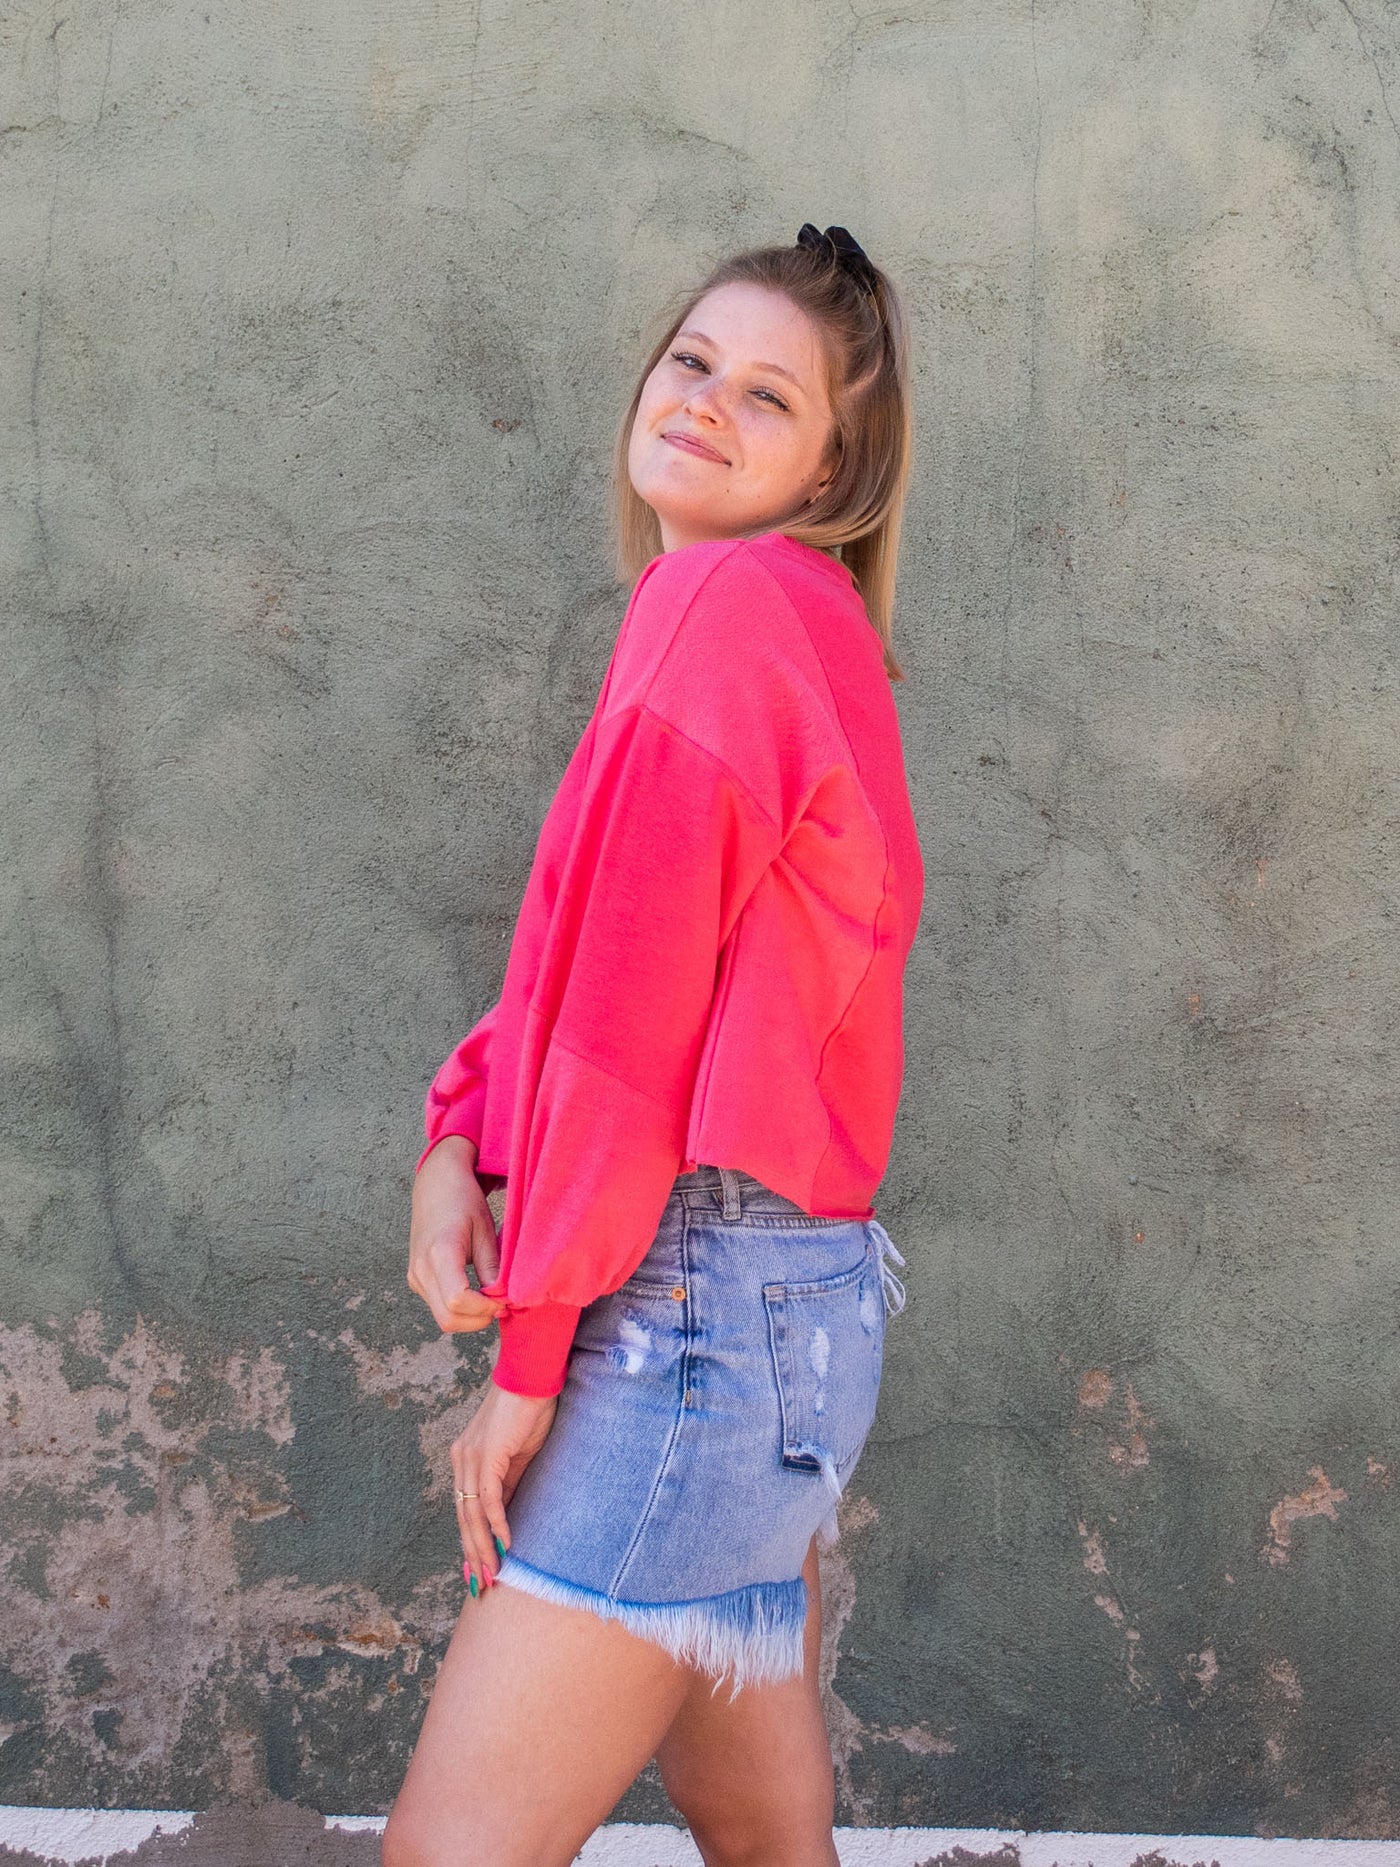 A model wearing a hot pink colored cropped sweatshirt with arm stitching details. She has it on with light washed, frayed jean shorts.